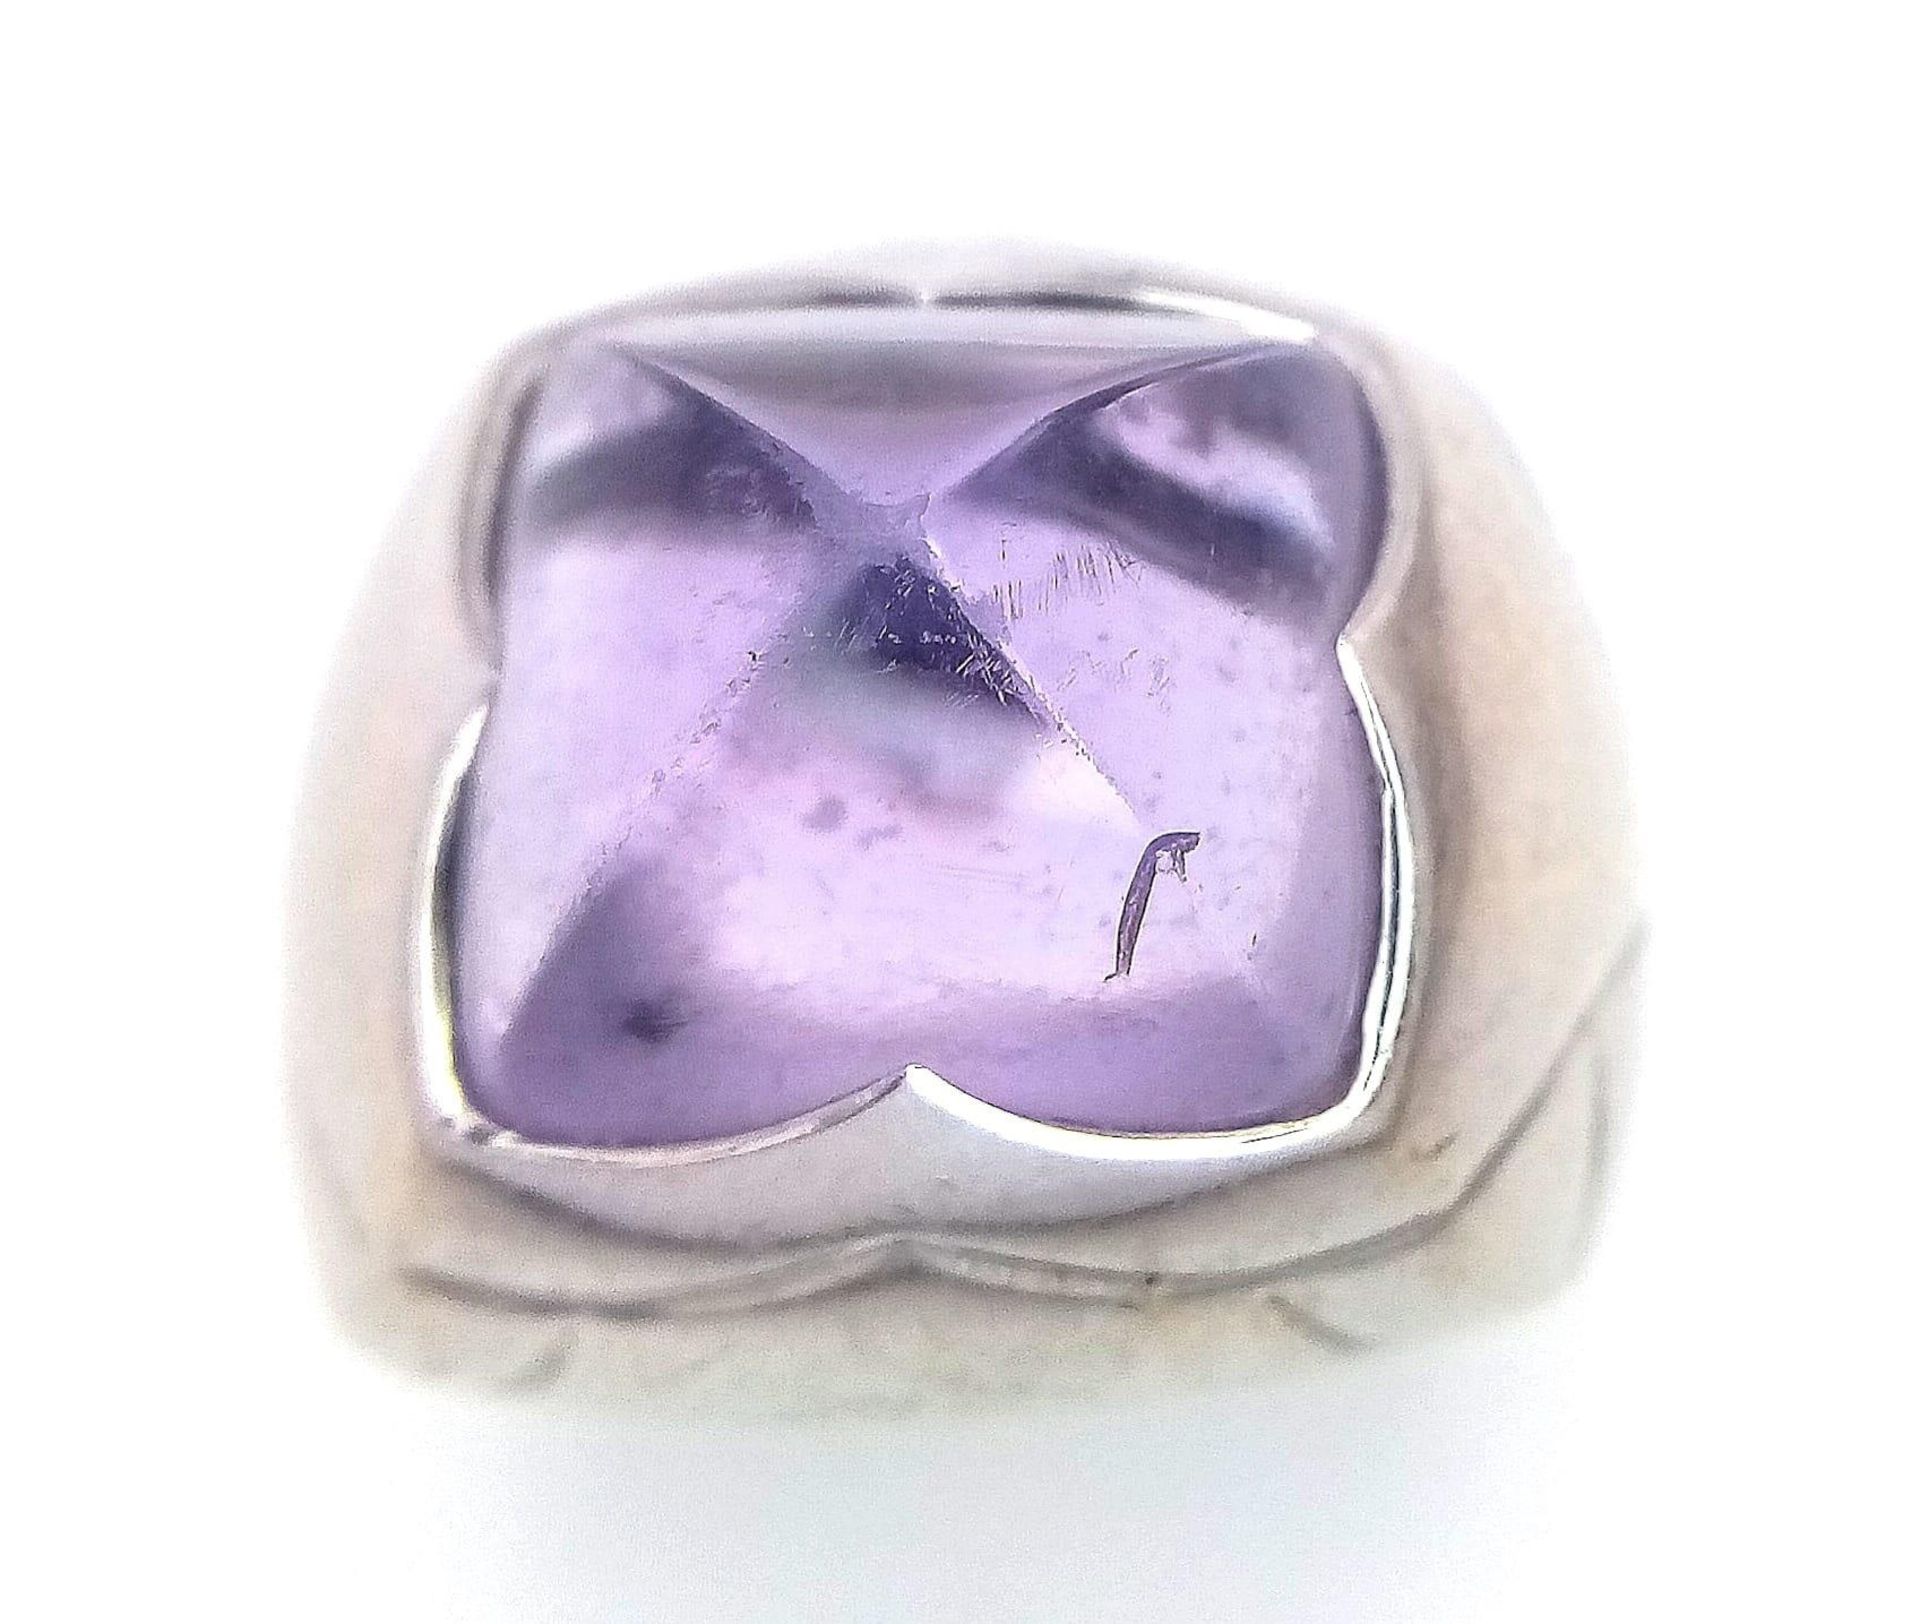 An 18K White Gold Bulgari Amethyst Pyramid Ring. Size K. 16.41g total weight. Ref: 016531 - Image 4 of 7